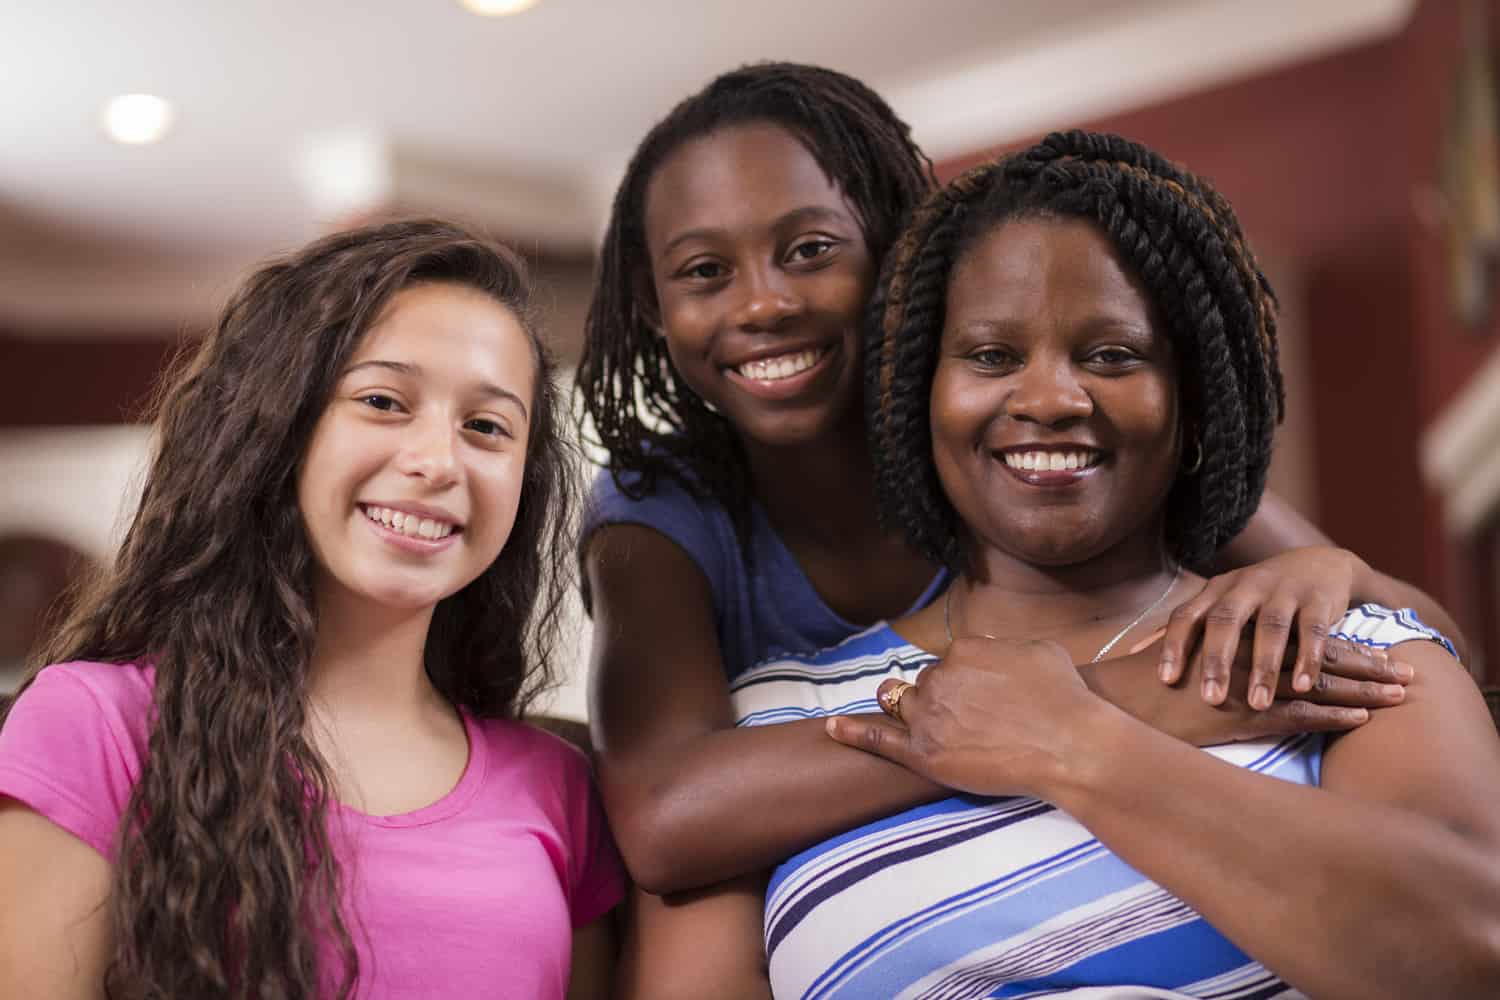 mom with her daughters, resources for teens, resources for parents and caregivers, teen sexual health info, teen health support